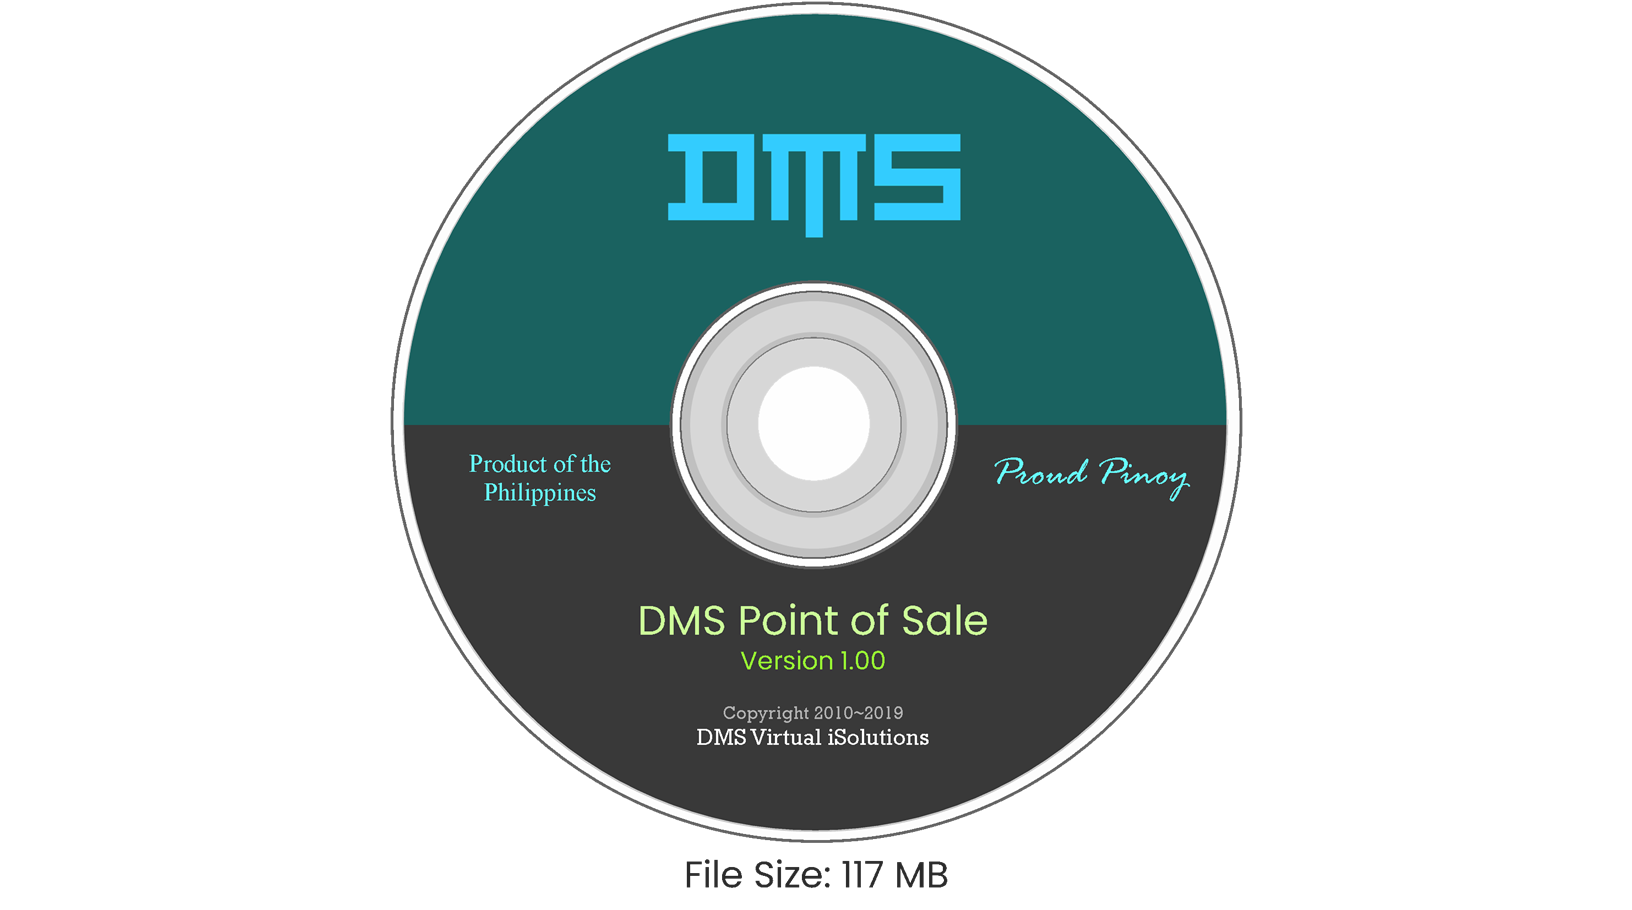 DMS Point of Sale 1.00